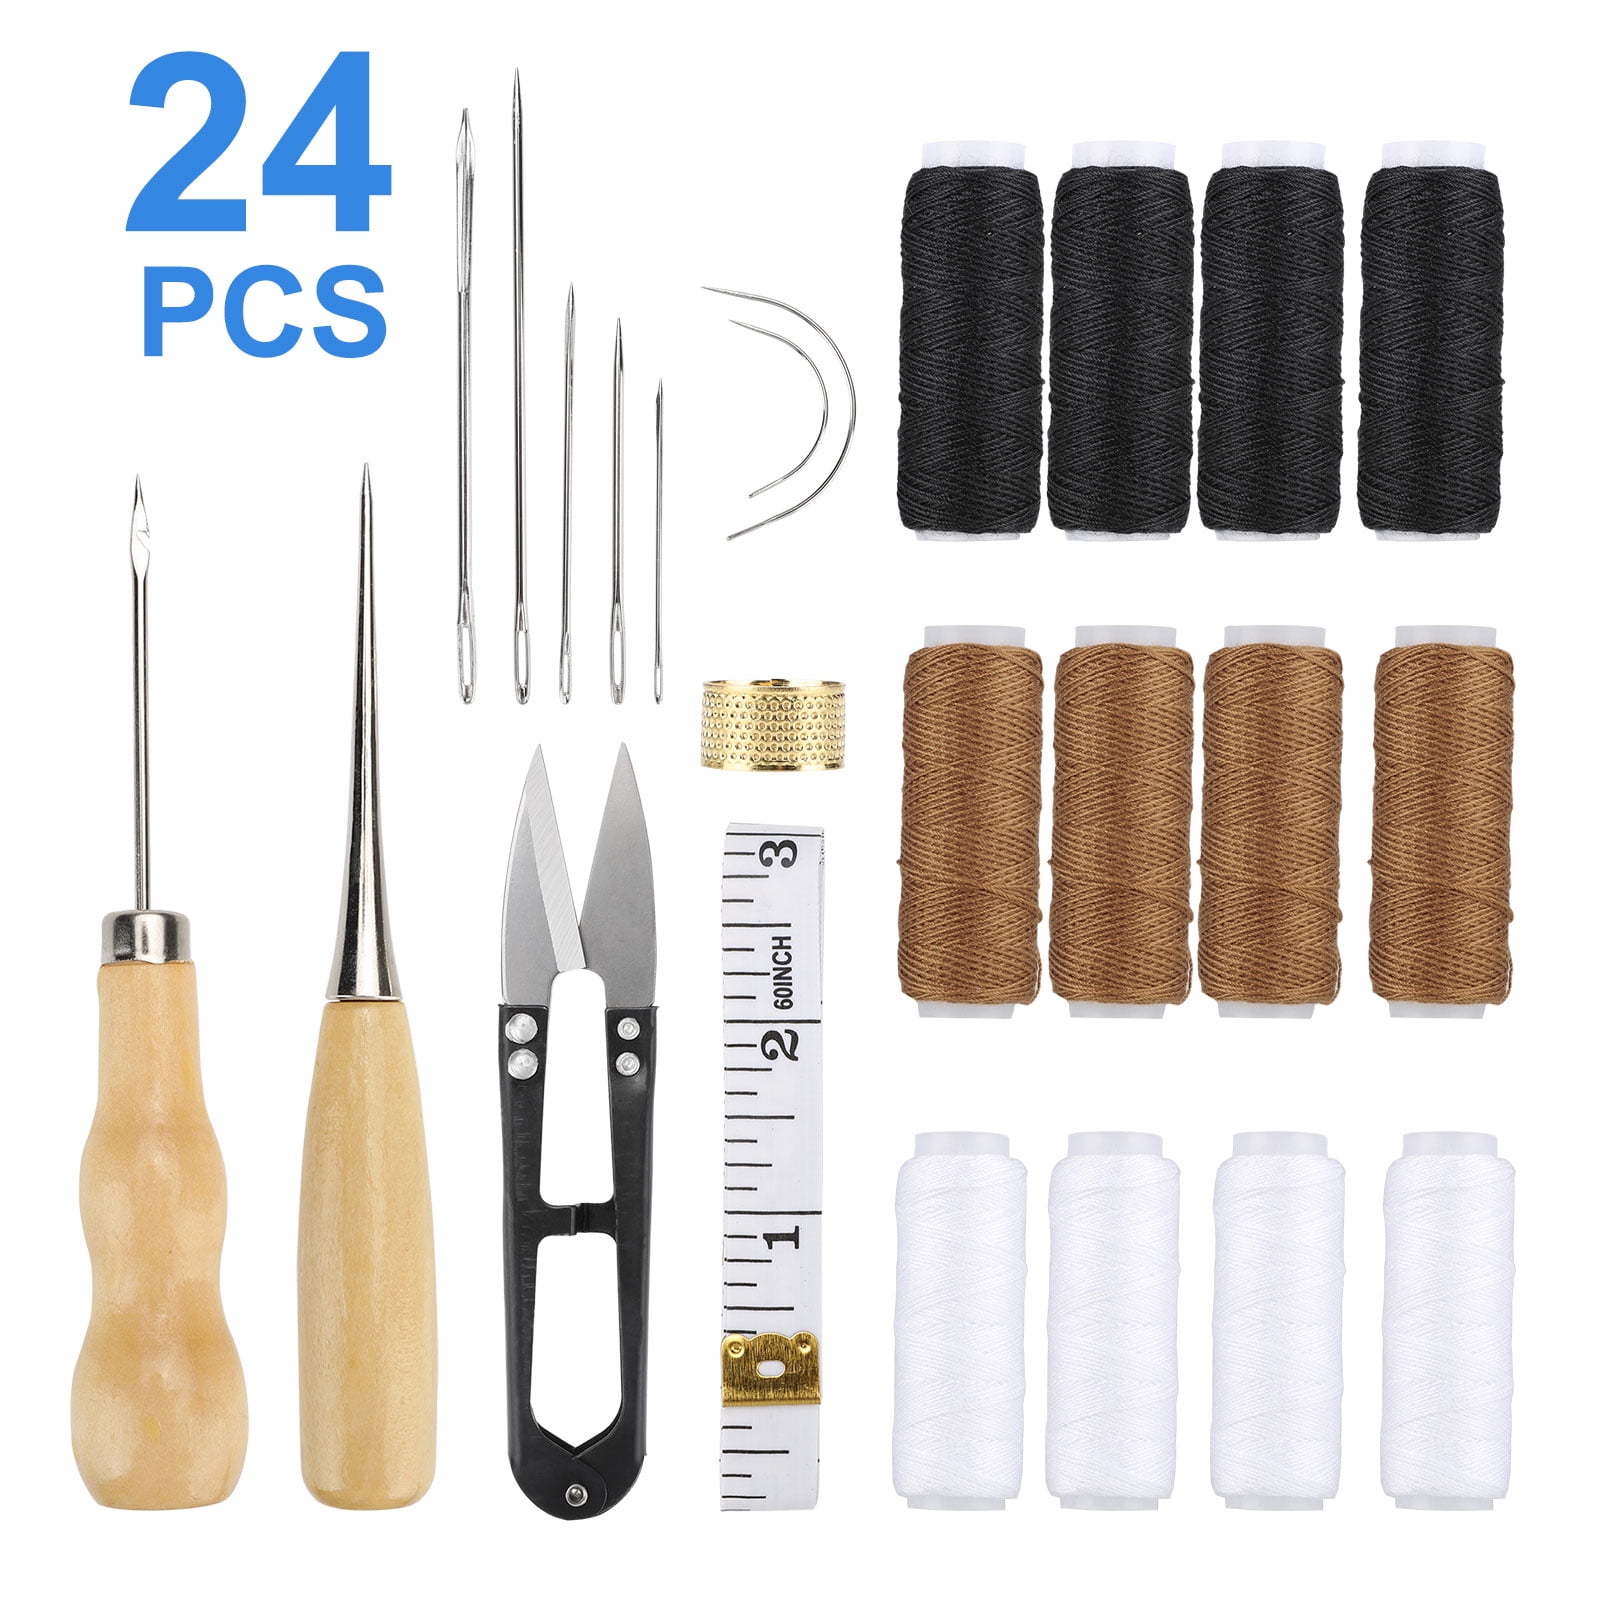 Leather Craft Hand Tools Kit for Upholstery Carpet Canvas DIY Sewing QLOUNI 37PCS Leather Sewing Kit Leather Repair Kit Leather Stitching Kit with Leather Needle and Waxed Thread for Leather Sewing 